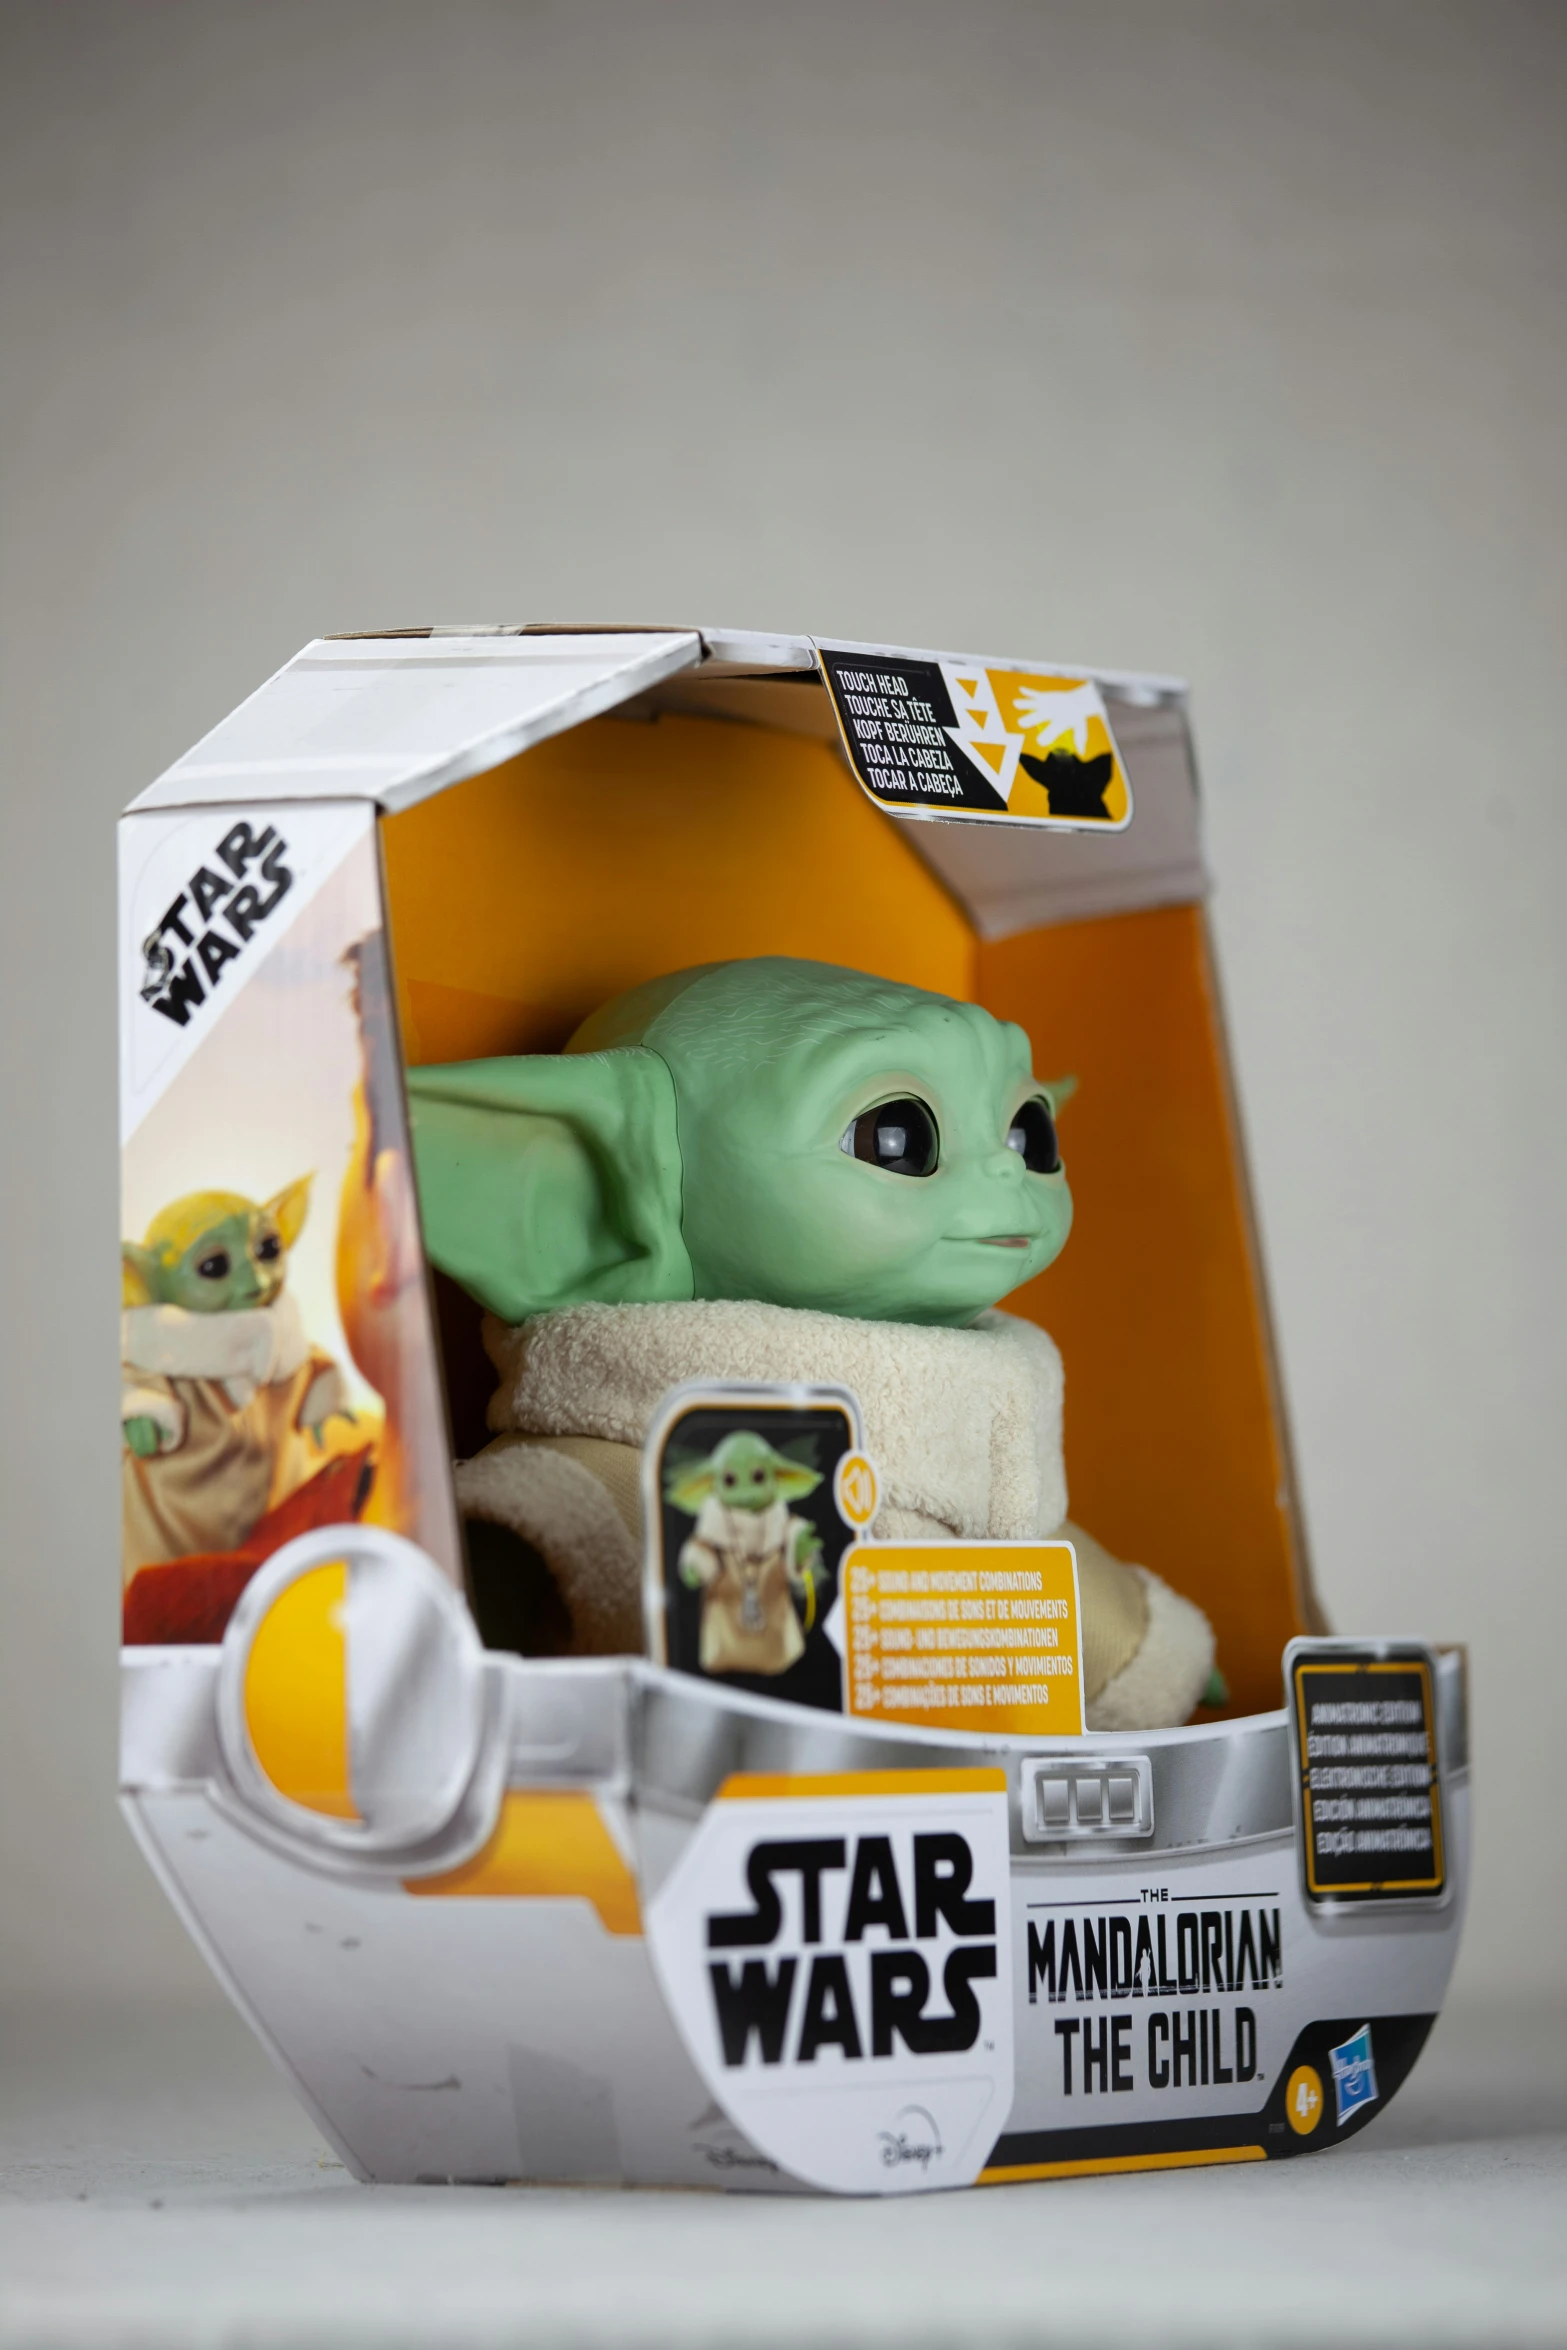 a baby yoda plush toy in a star wars packaging